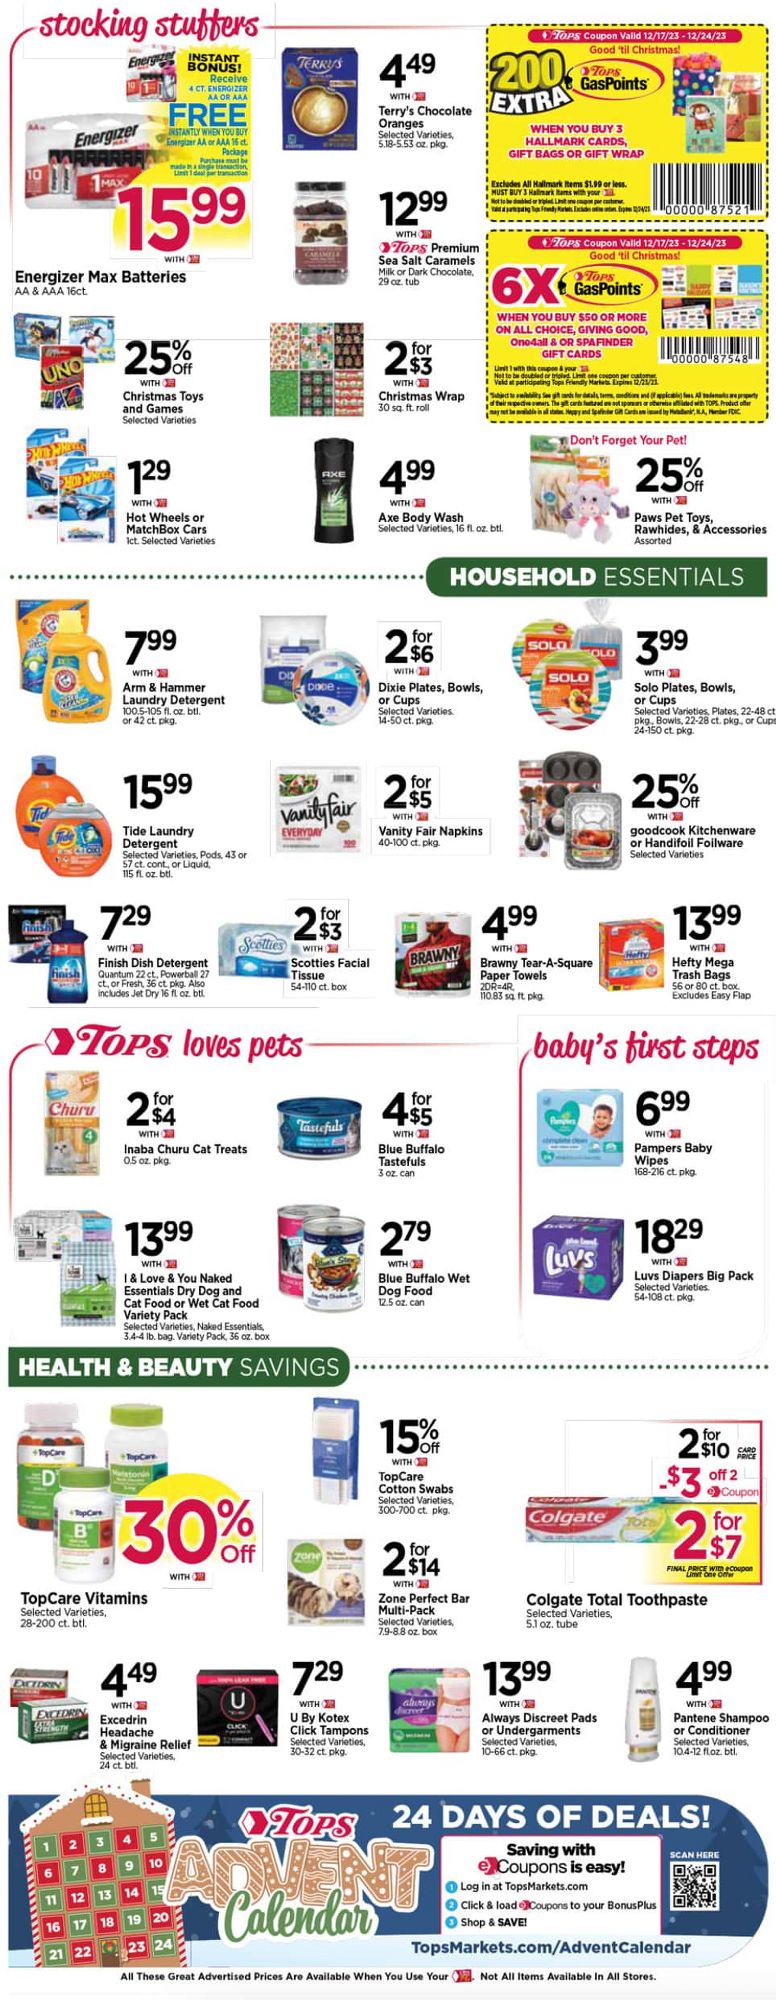 Tops Christmas July 2024 Weekly Sales, Deals, Discounts and Digital Coupons.